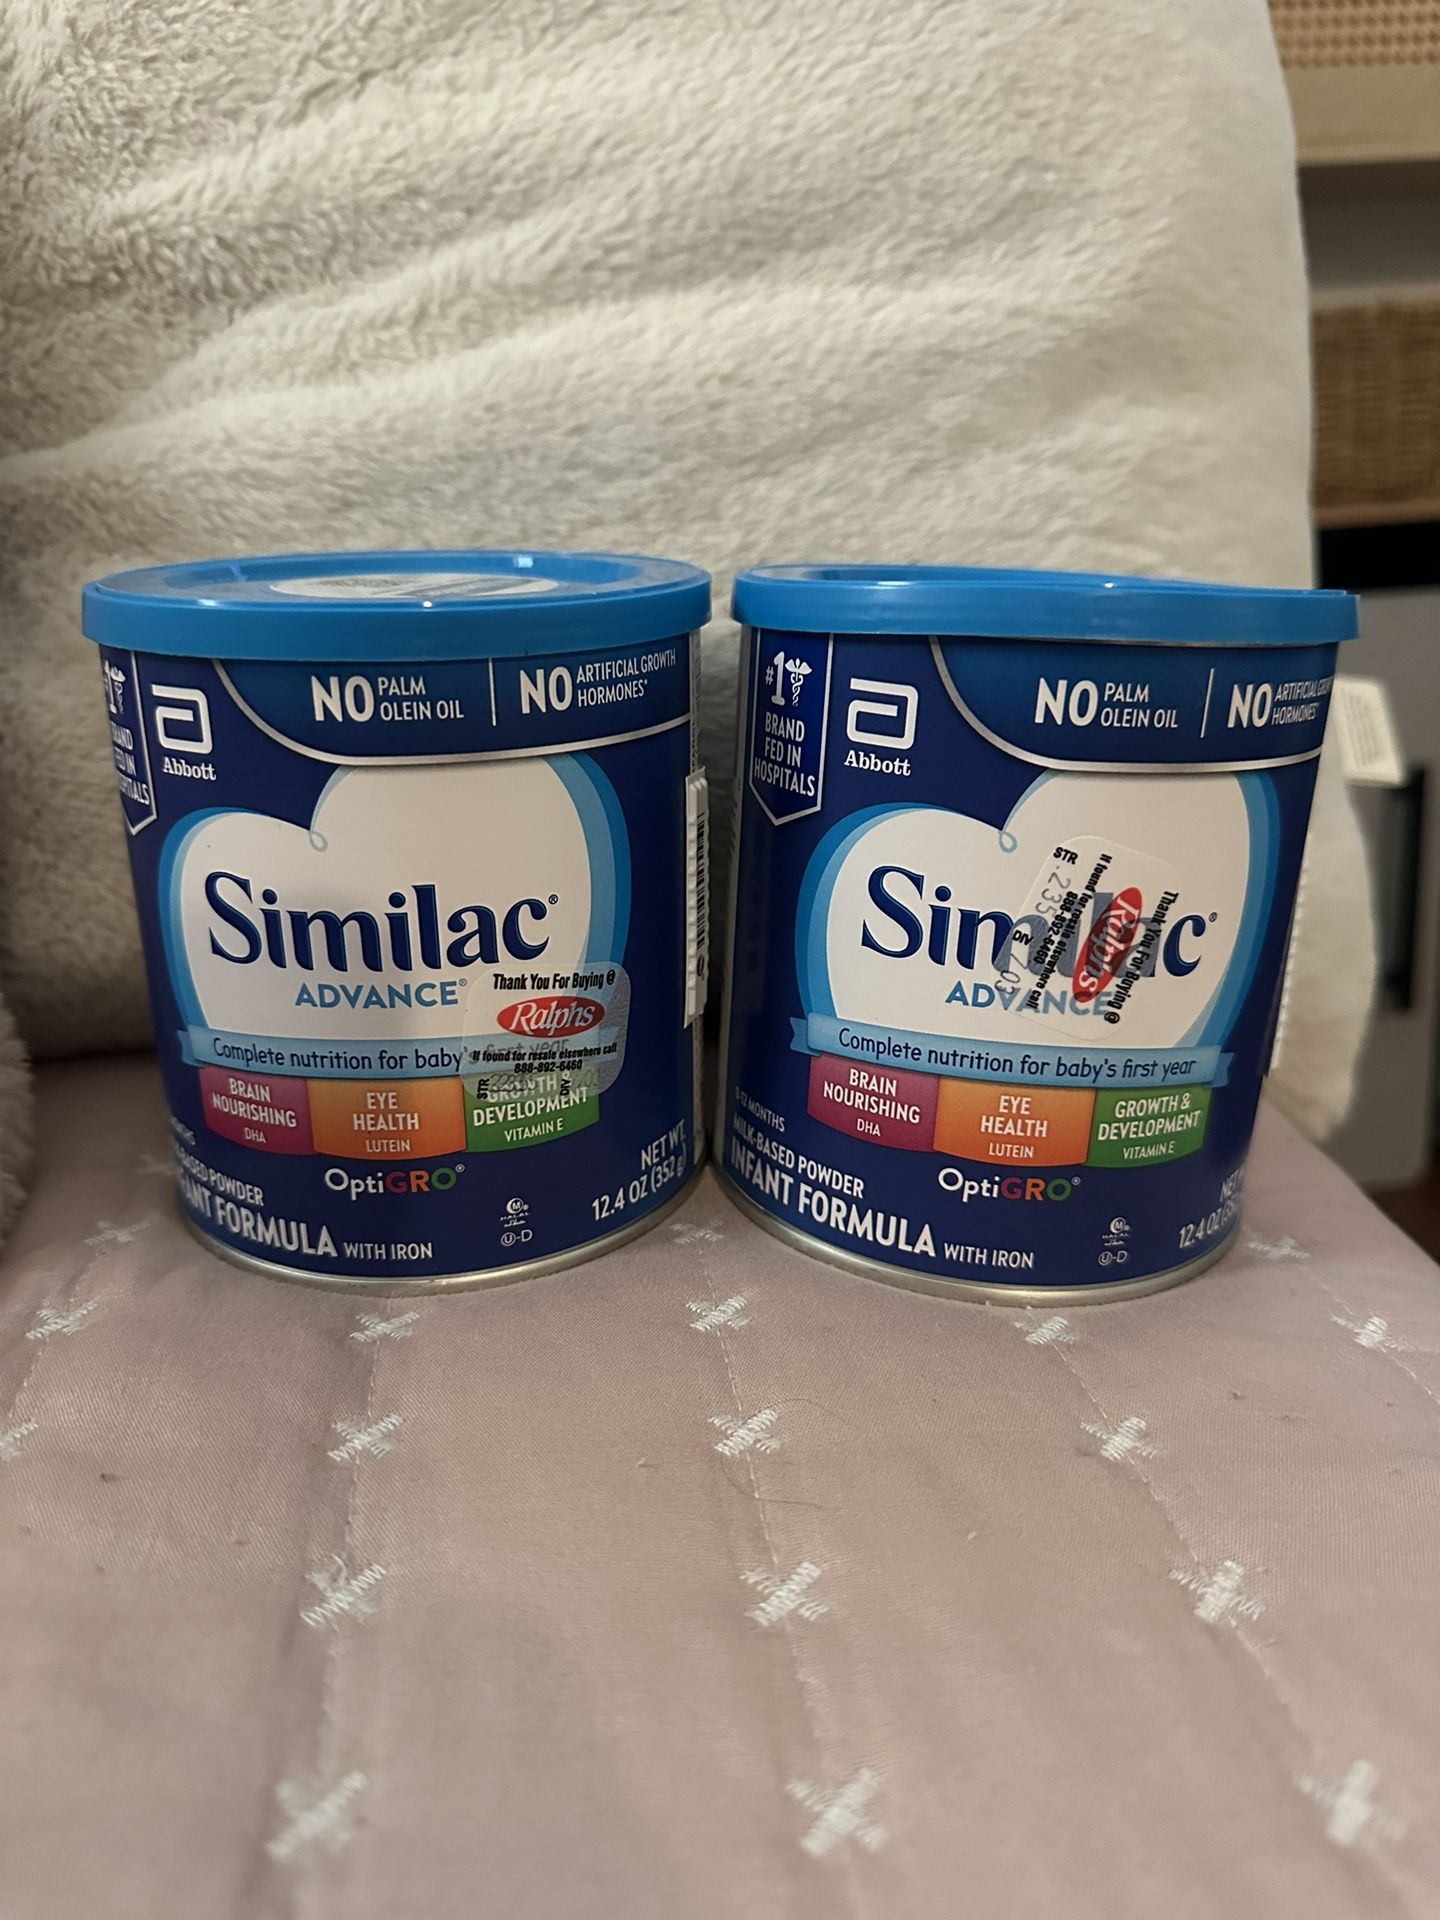 2 Similac Advance Brand New For Free